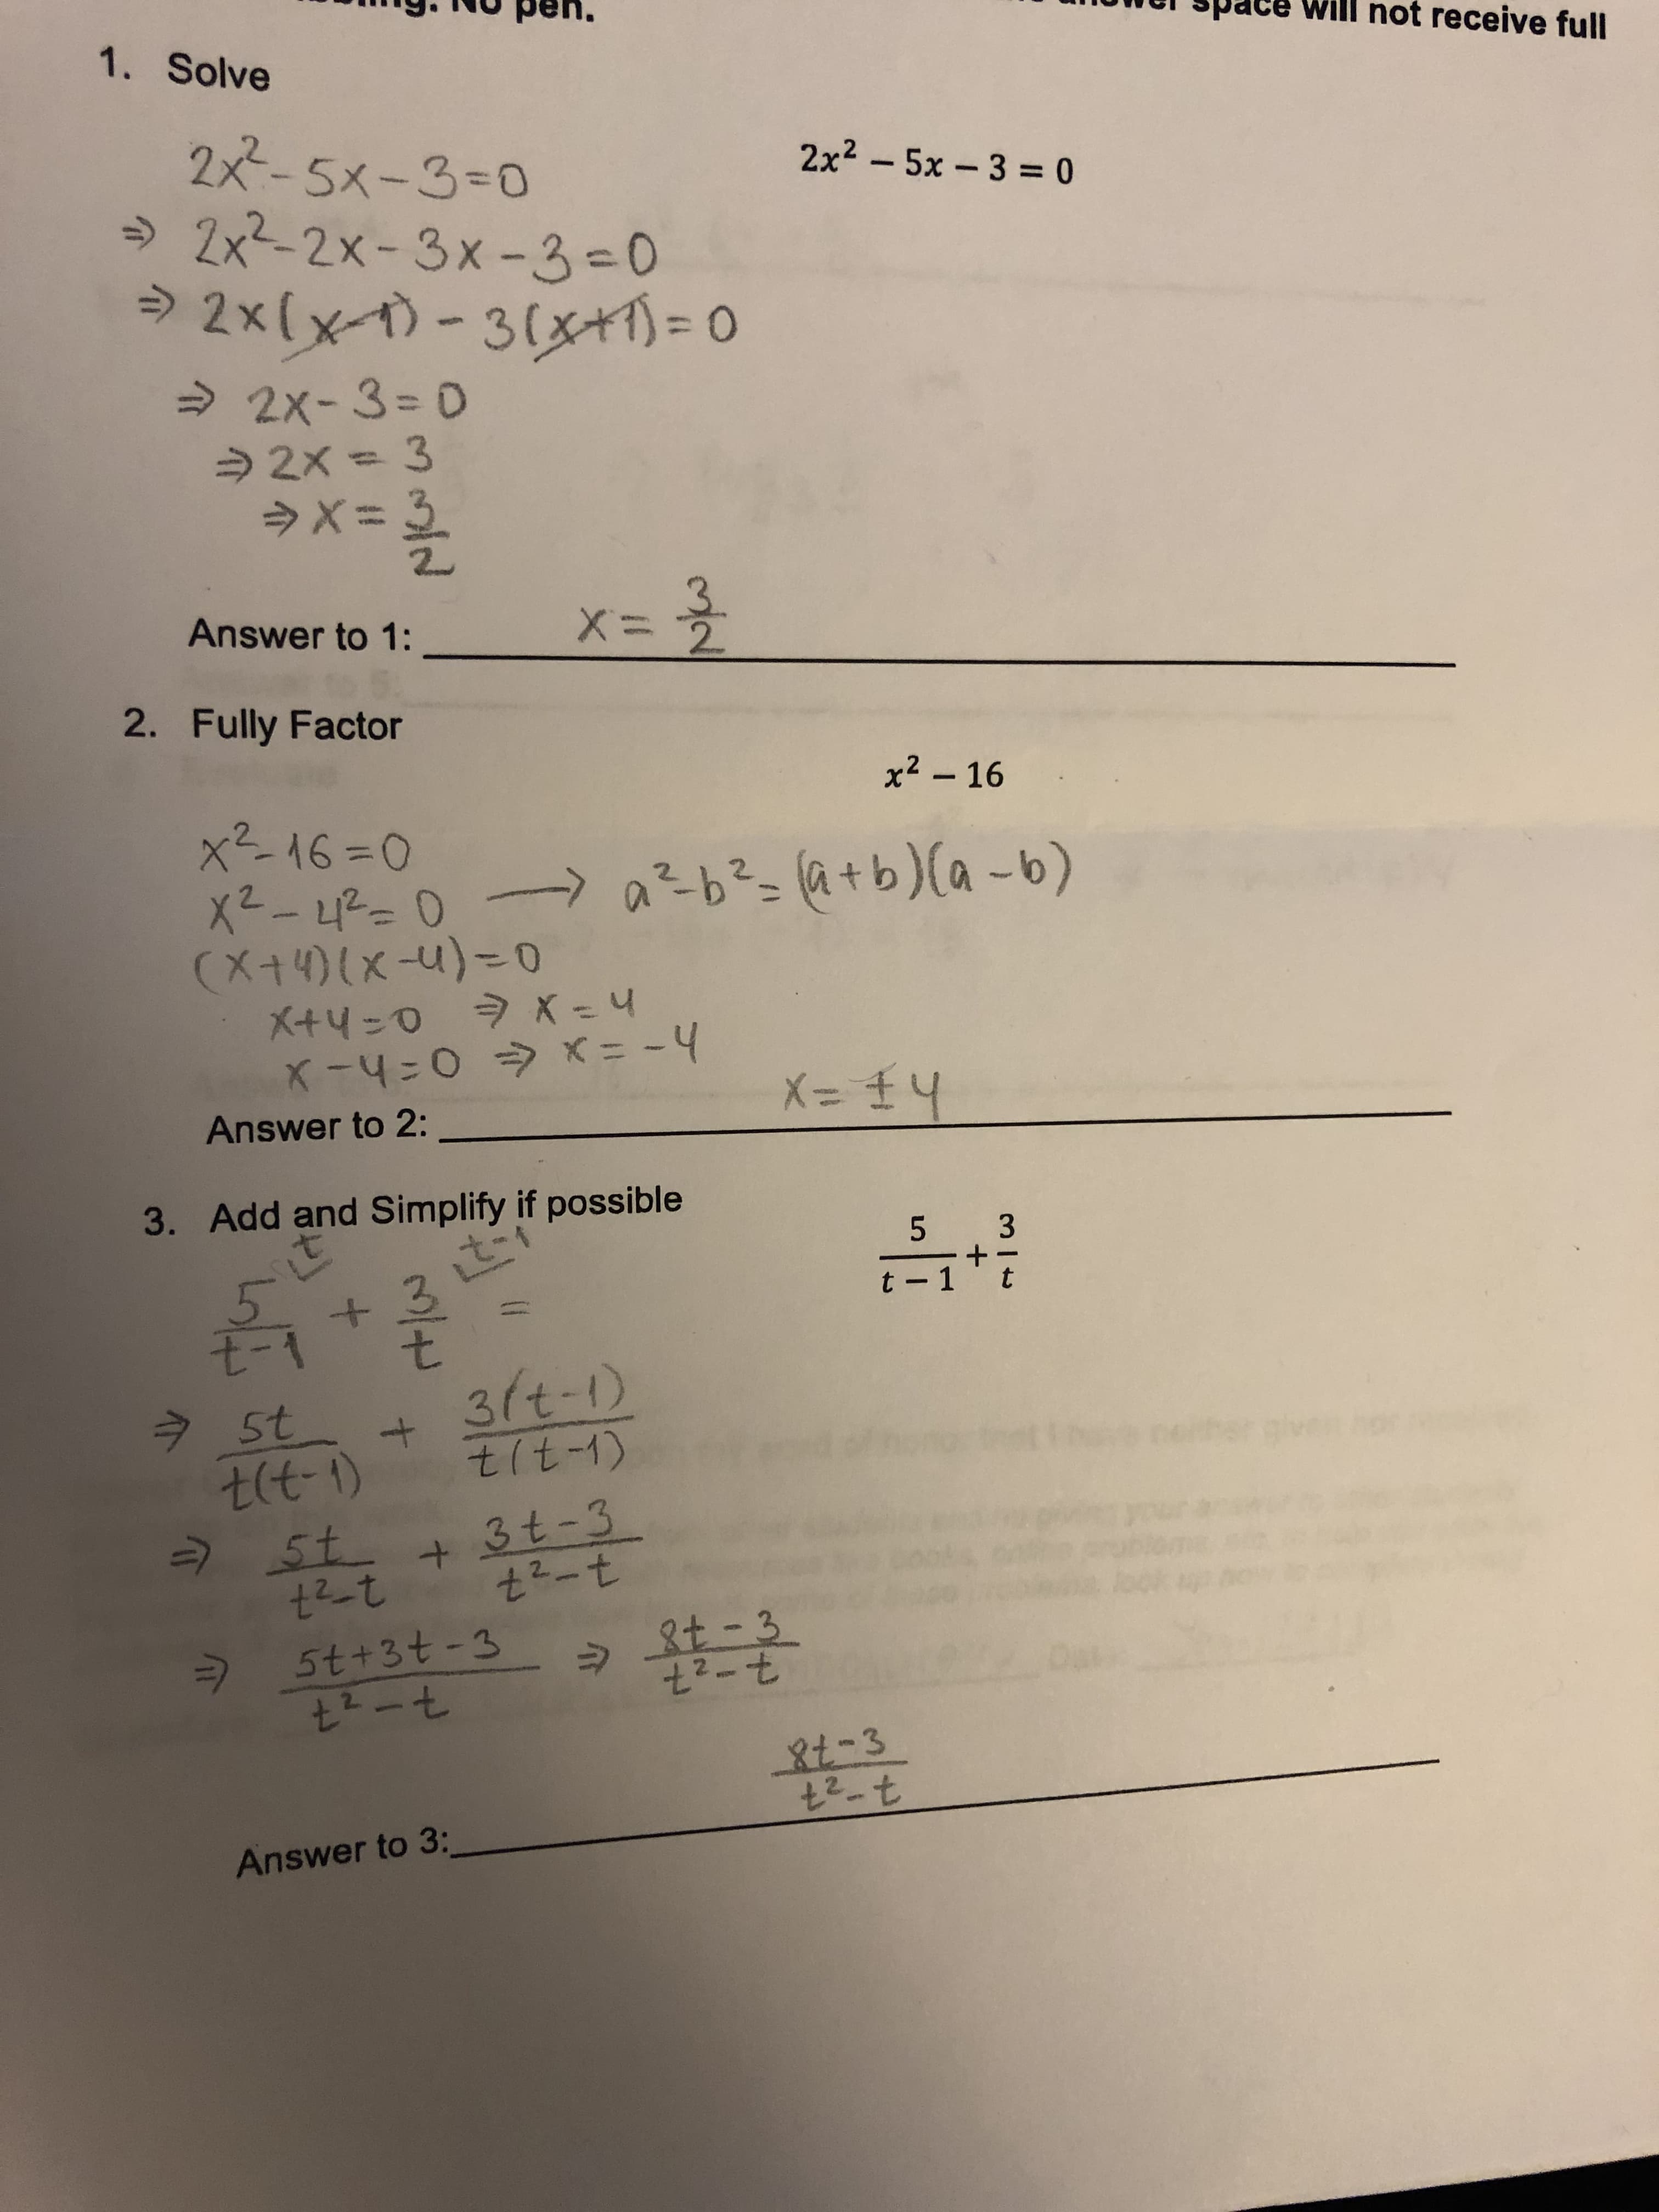 g.1H0 pen.
uwel space will not receive full
1. Solve
2x5x-3-o
→ 2x2-2x-3x-3-O
2x2- 5x-3-0
Answer to 1:
2. Fully Factor
x2 16
Answer to 2:
3. Add and Simplify if possible
t-1+t
8
t-1 t
t(t-t) tt-1)
2.
Answer to 3:
